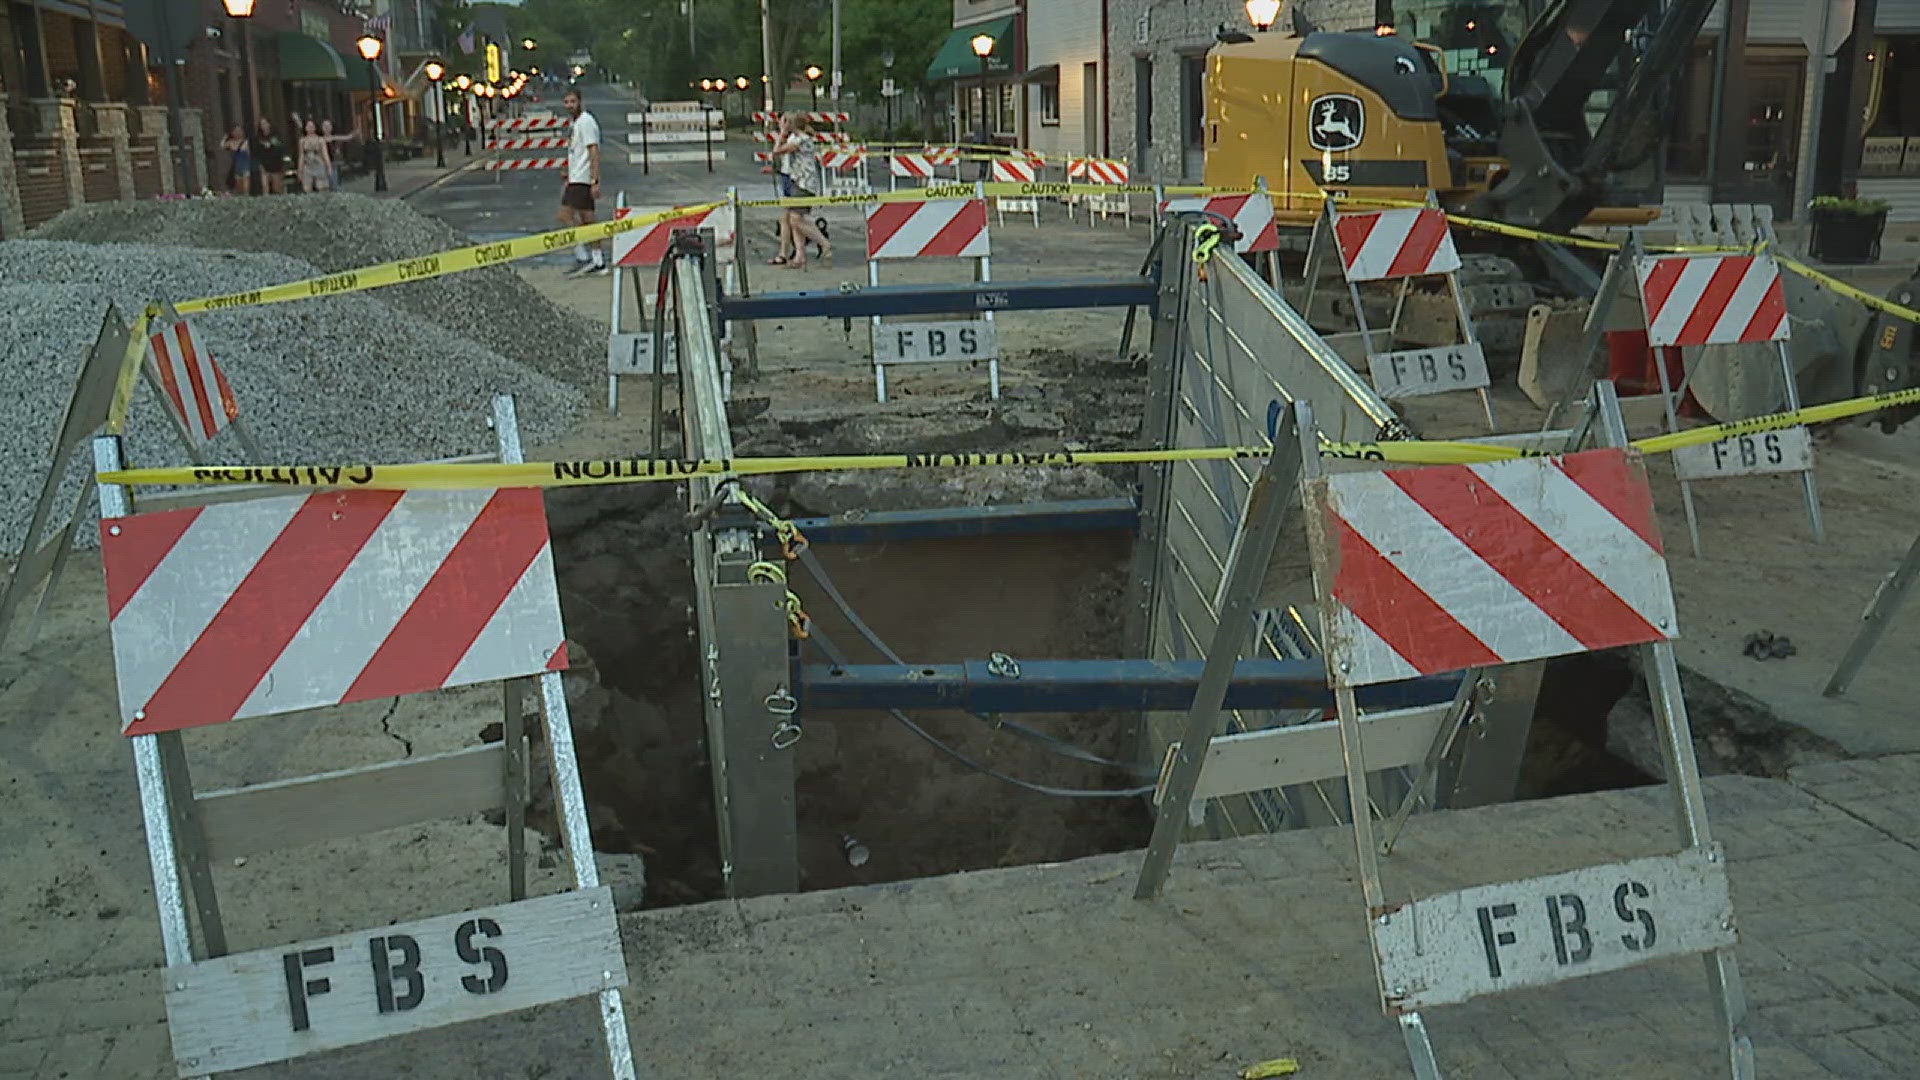 Workers are tackling a water main break in Davenport, and police in Illinois are warning residents about ATM skimmers in Peru and Ottawa.